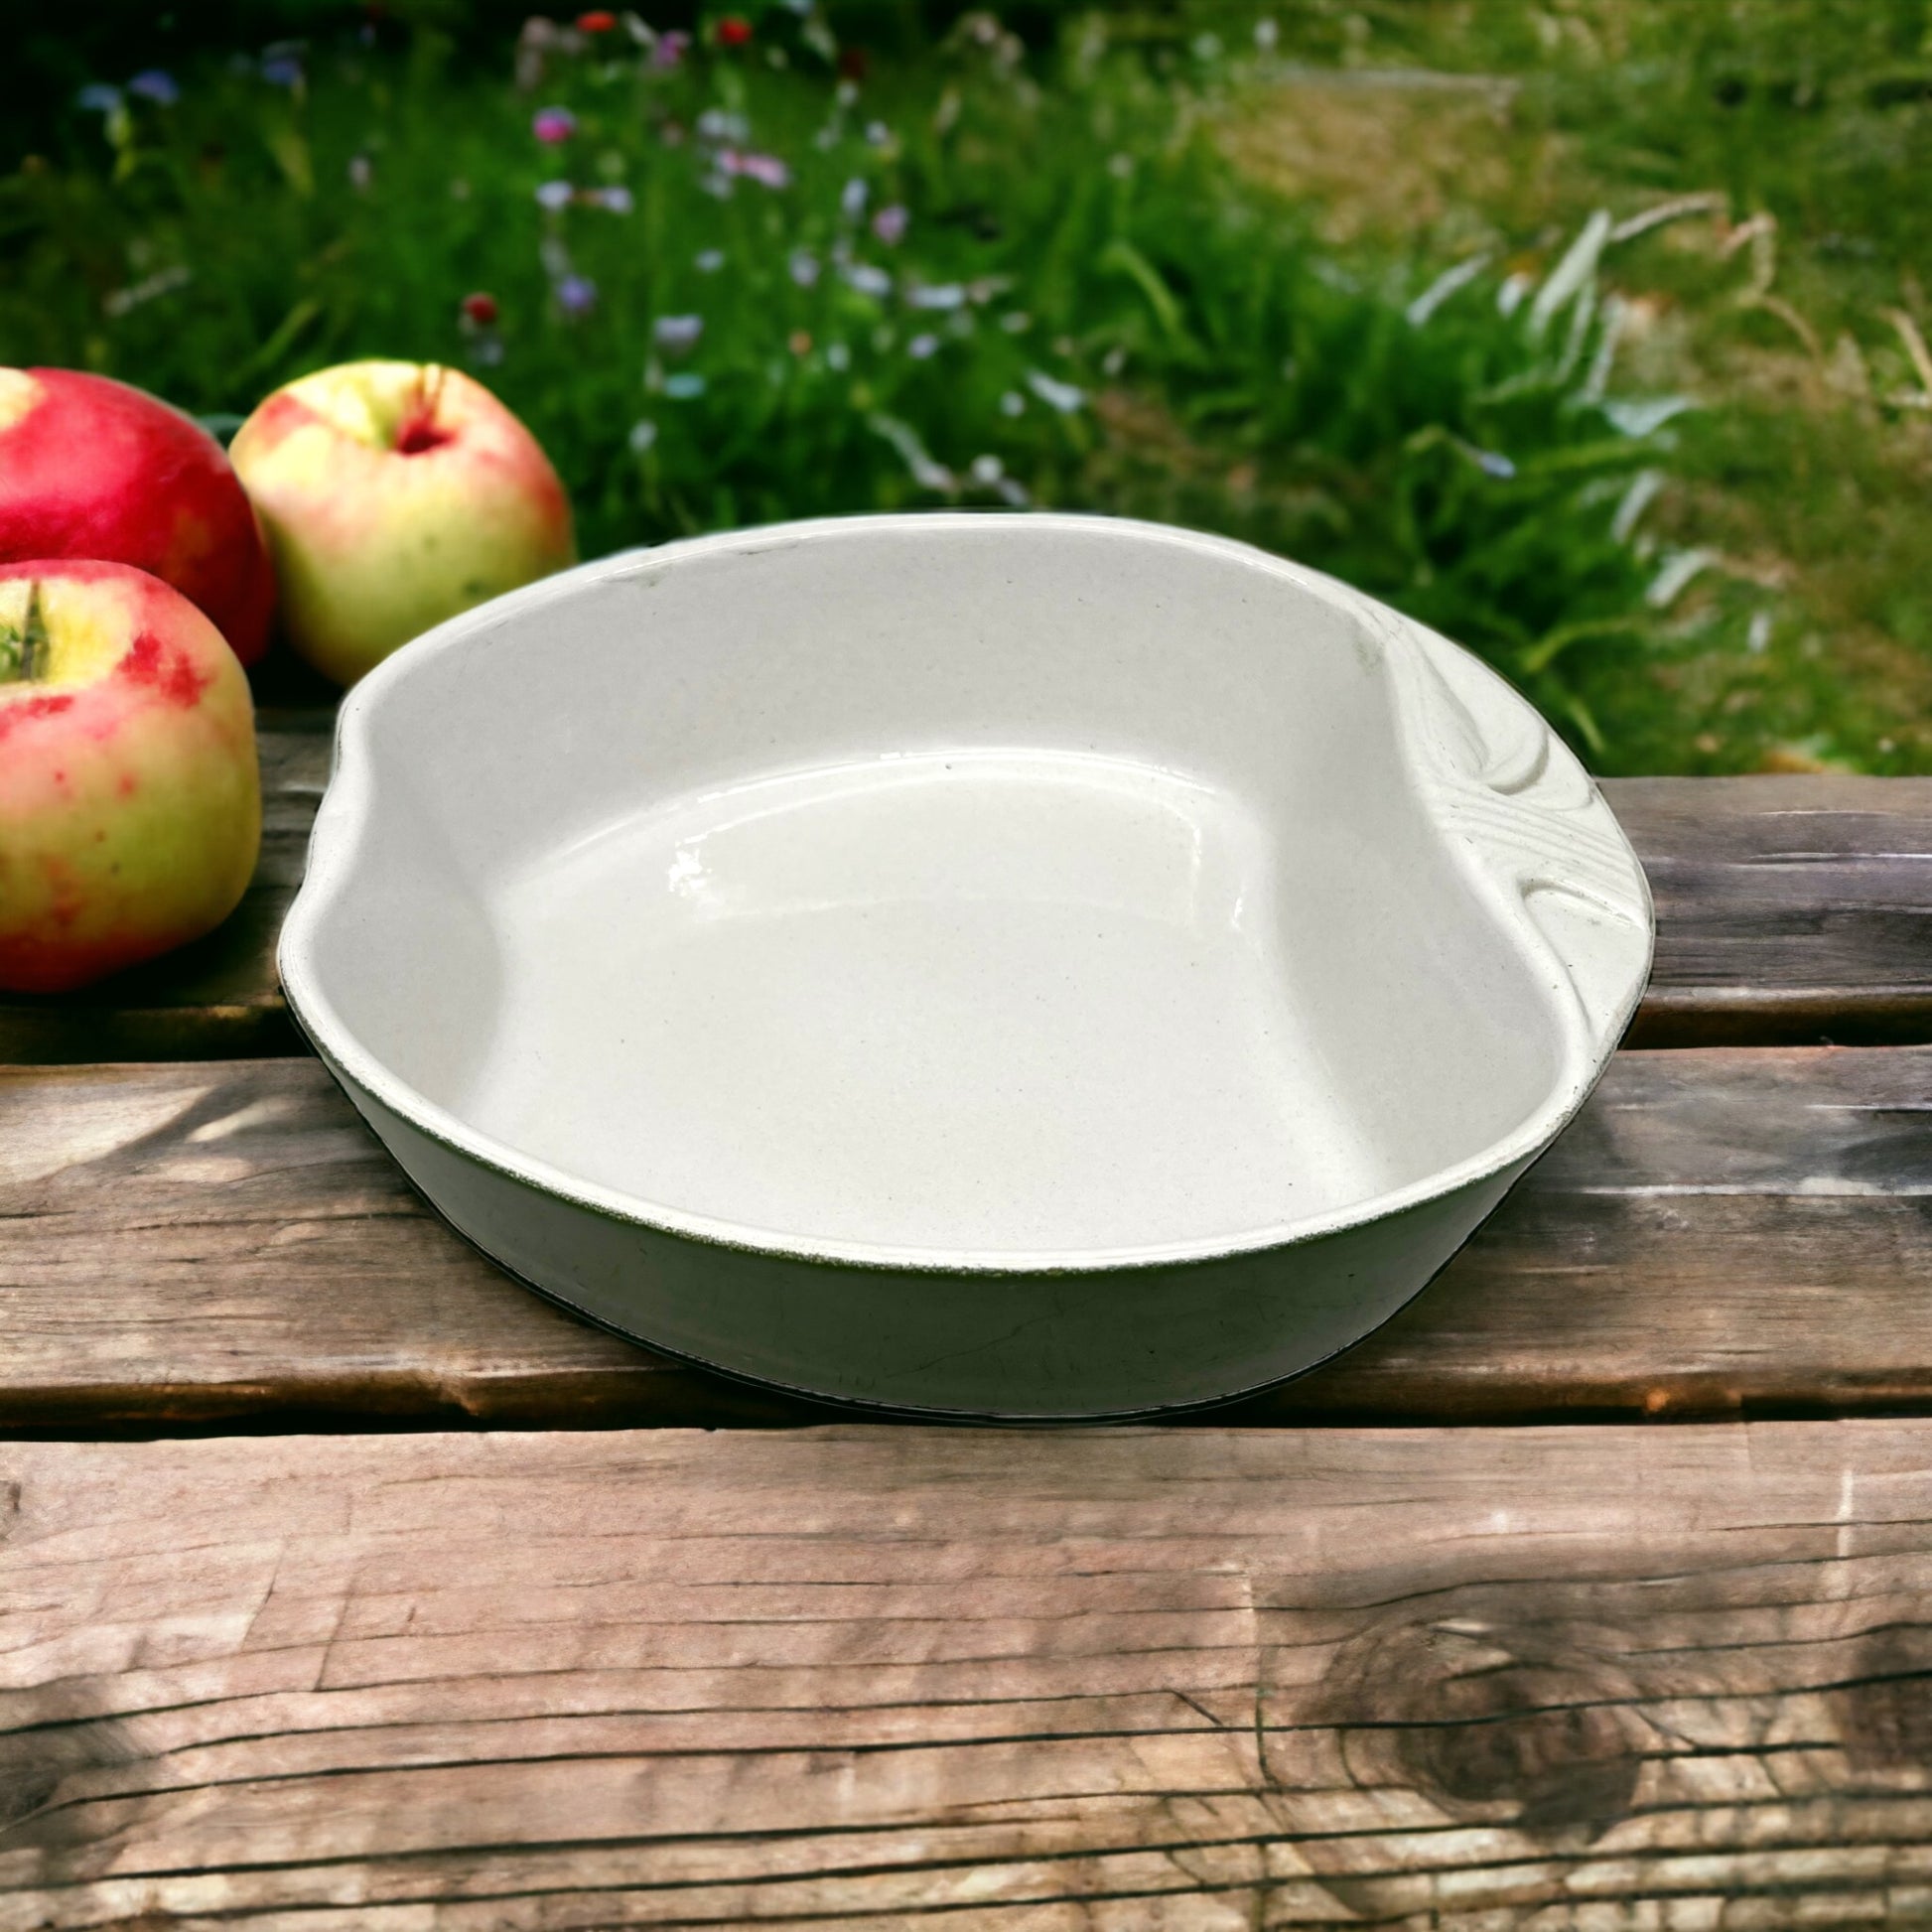 image French apple pie dish on a wooden table with apples 